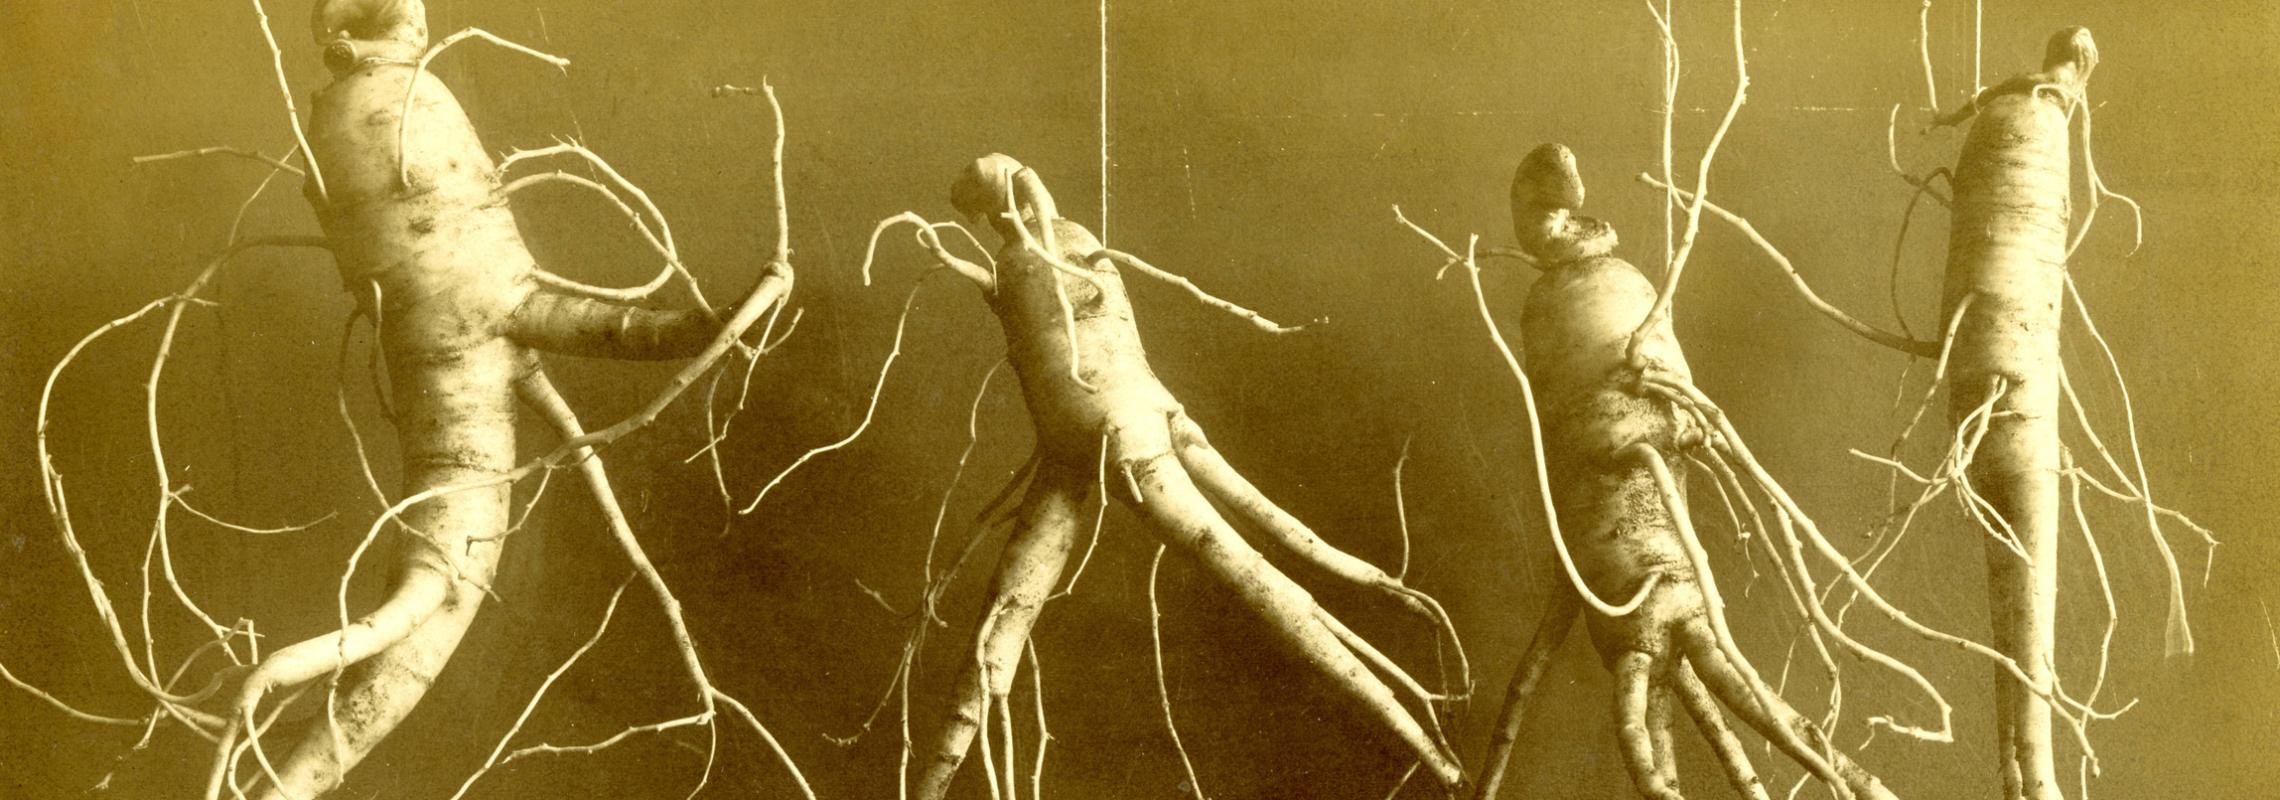 Sepia toned photo of ginseng roots